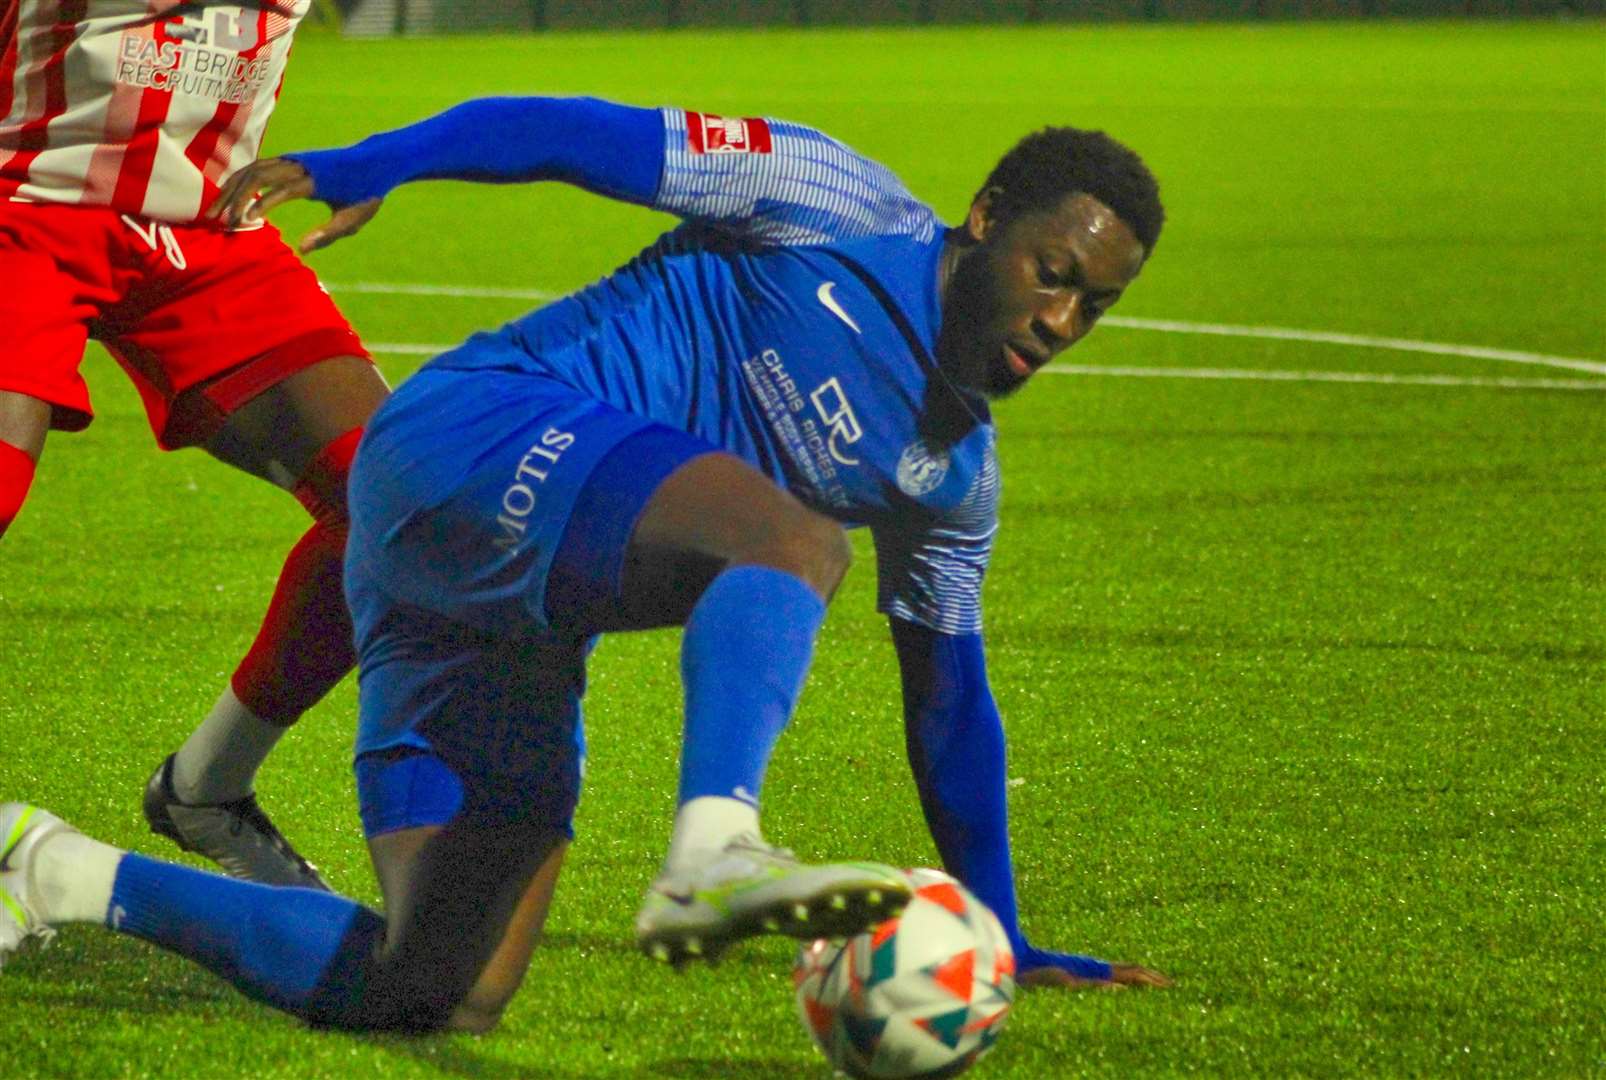 Frontman Marcel Barrington netted a first-half penalty in Bay's loss to Enfield. Picture: Keith Davy